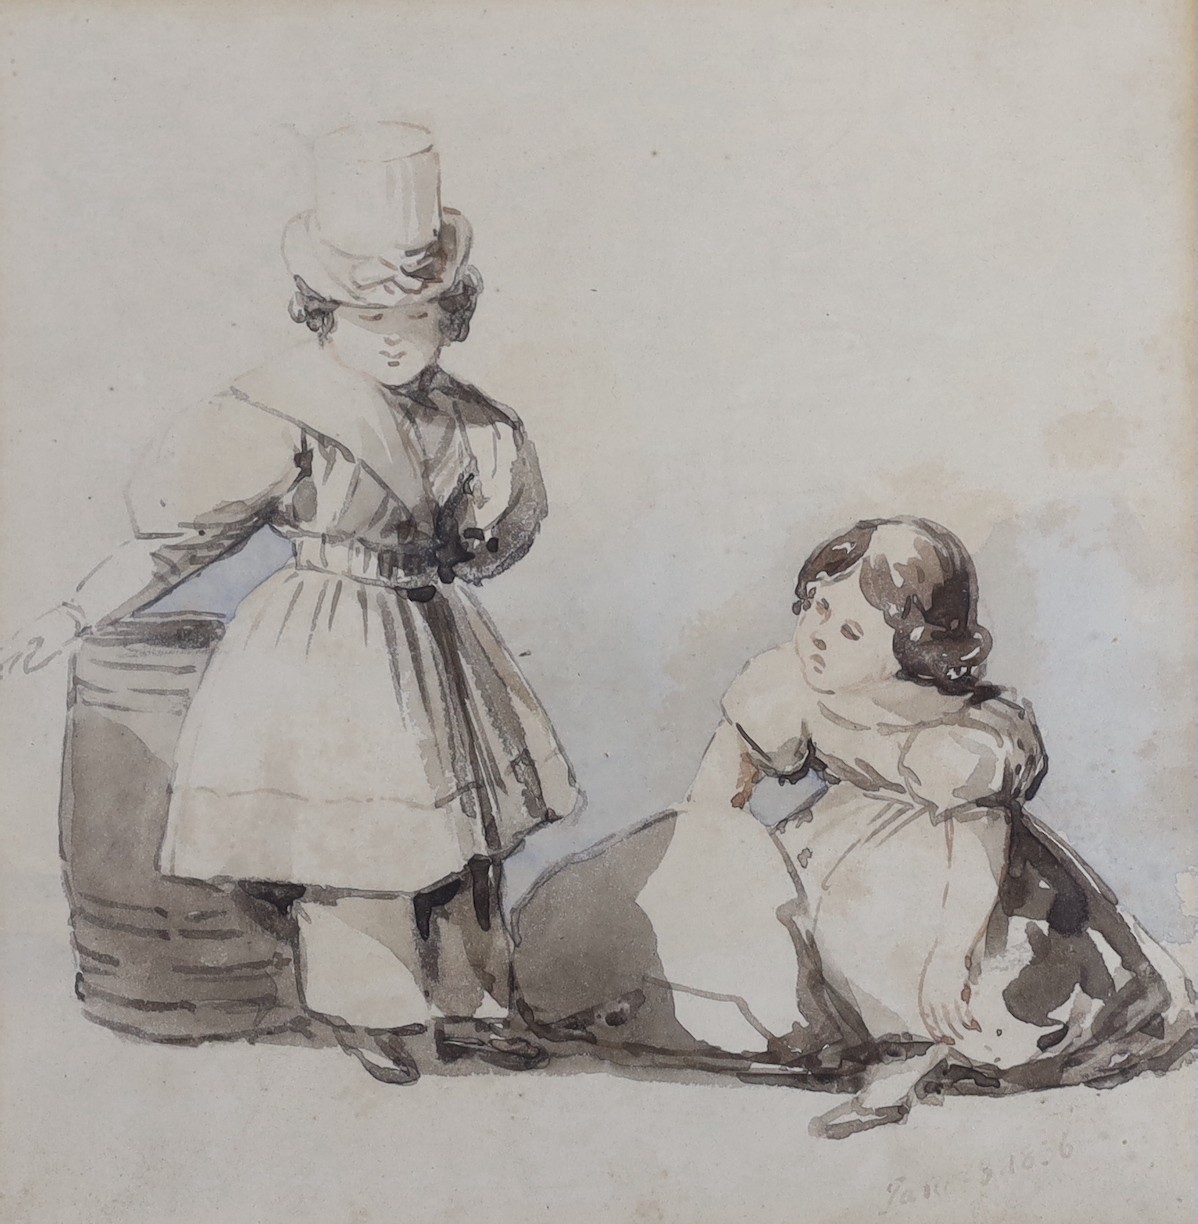 James (19th C.), watercolour, Study of two children, dated 1856, 17 x 16cm